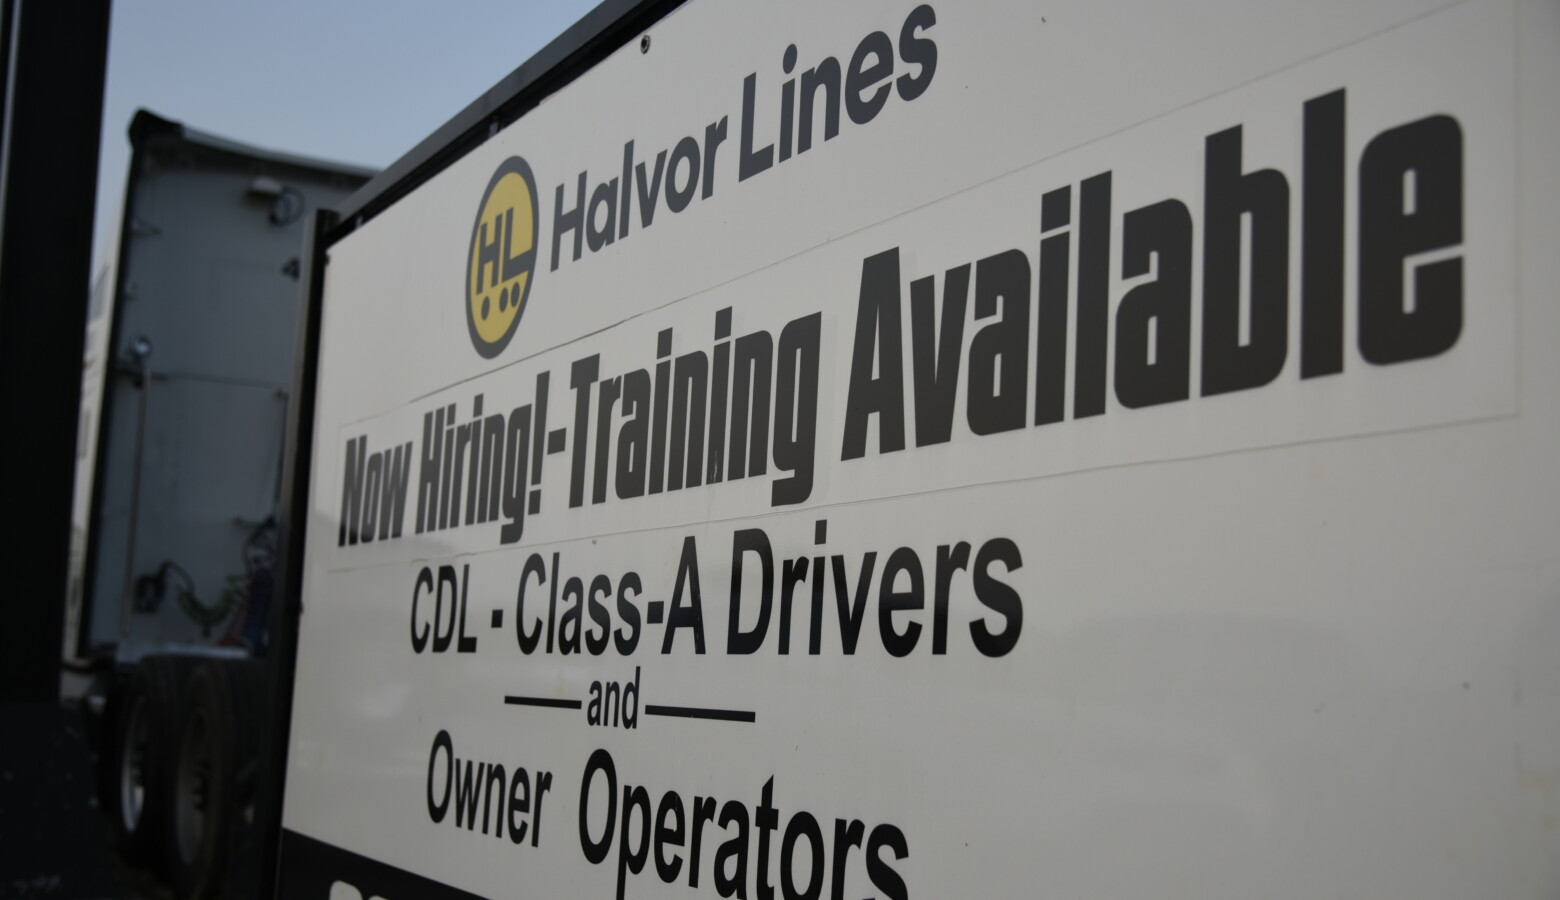 A trucking company in South Bend advertises training available to help new hires get CDL licenses. (Justin Hicks/IPB News)